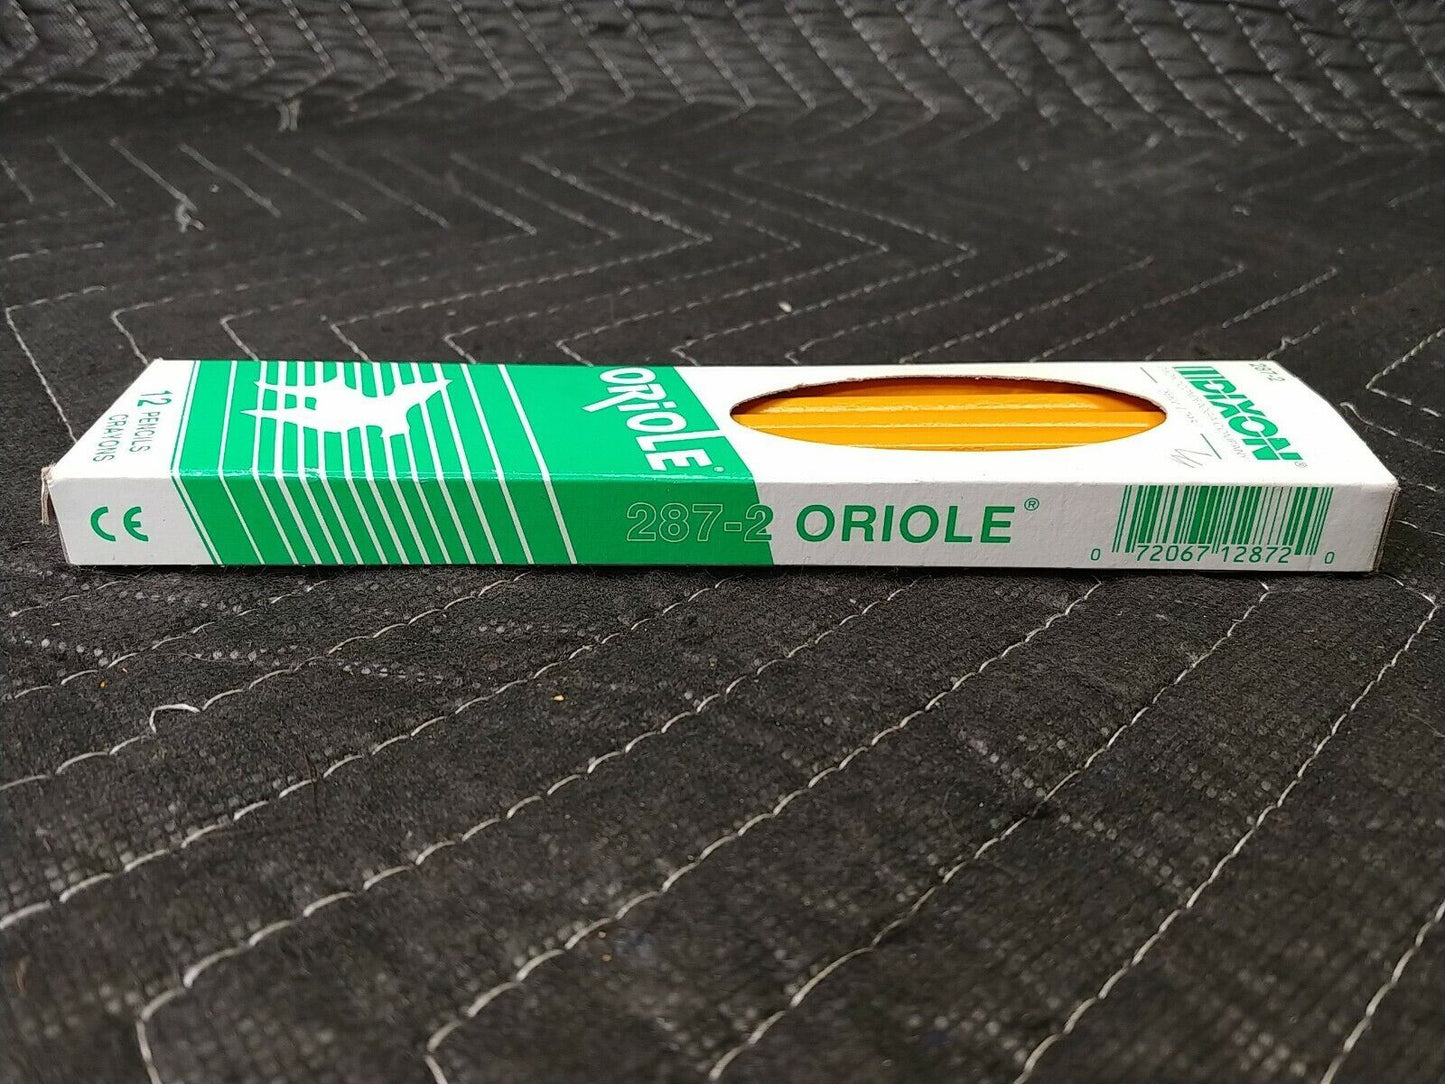 New! Vintage Dixon Ticonderoga Oriole 287-2 Pencils #2 HB Made In USA Pack Of 12